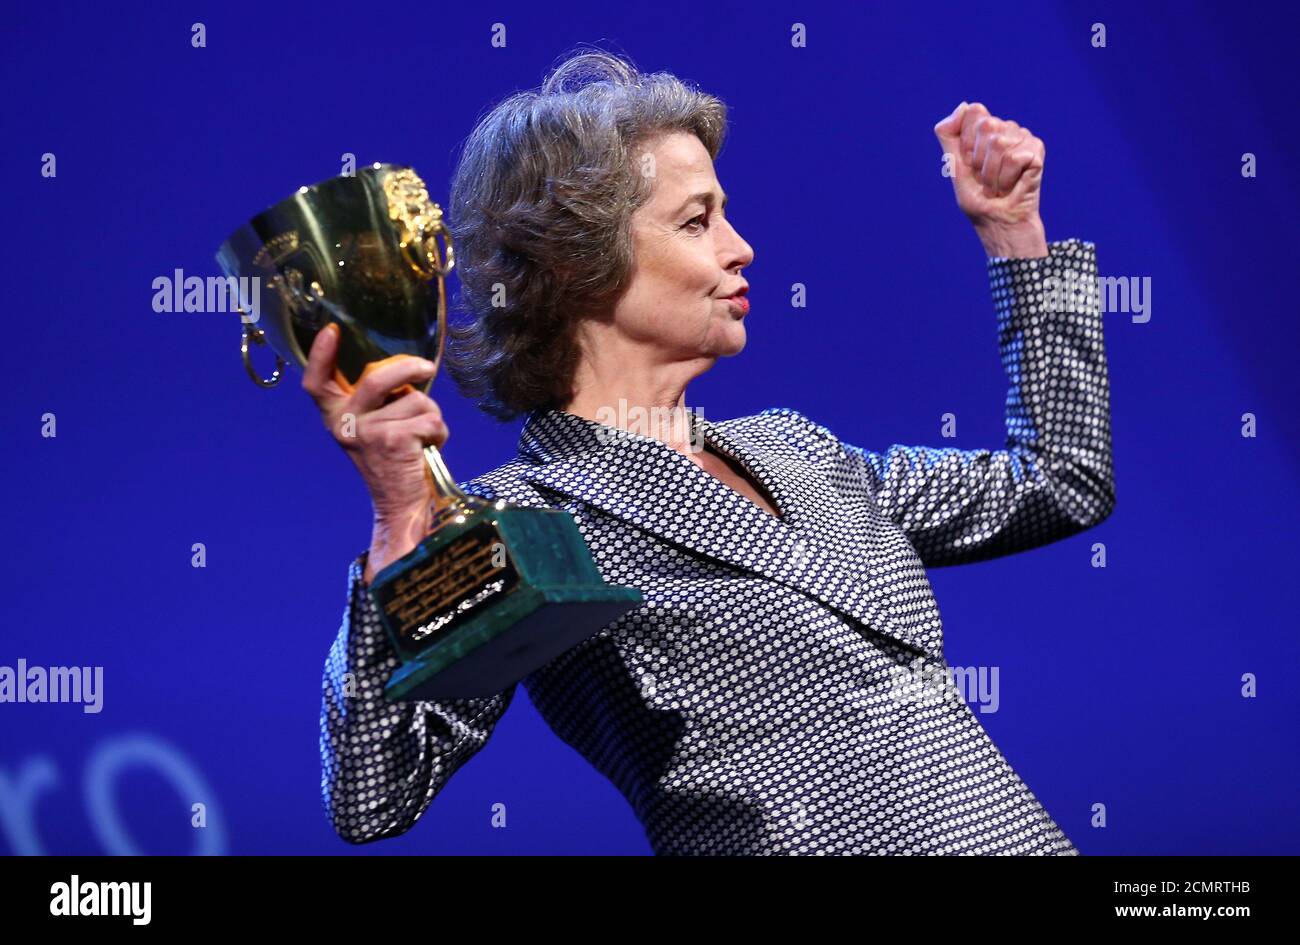 Charlotte Rampling holds the Coppa Volpi award for the best actress for the movie 'Hannah' during the awards ceremony at the 74th Venice Film Festival in Venice, Italy September 9, 2017. REUTERS/Alessandro Bianchi Stock Photo